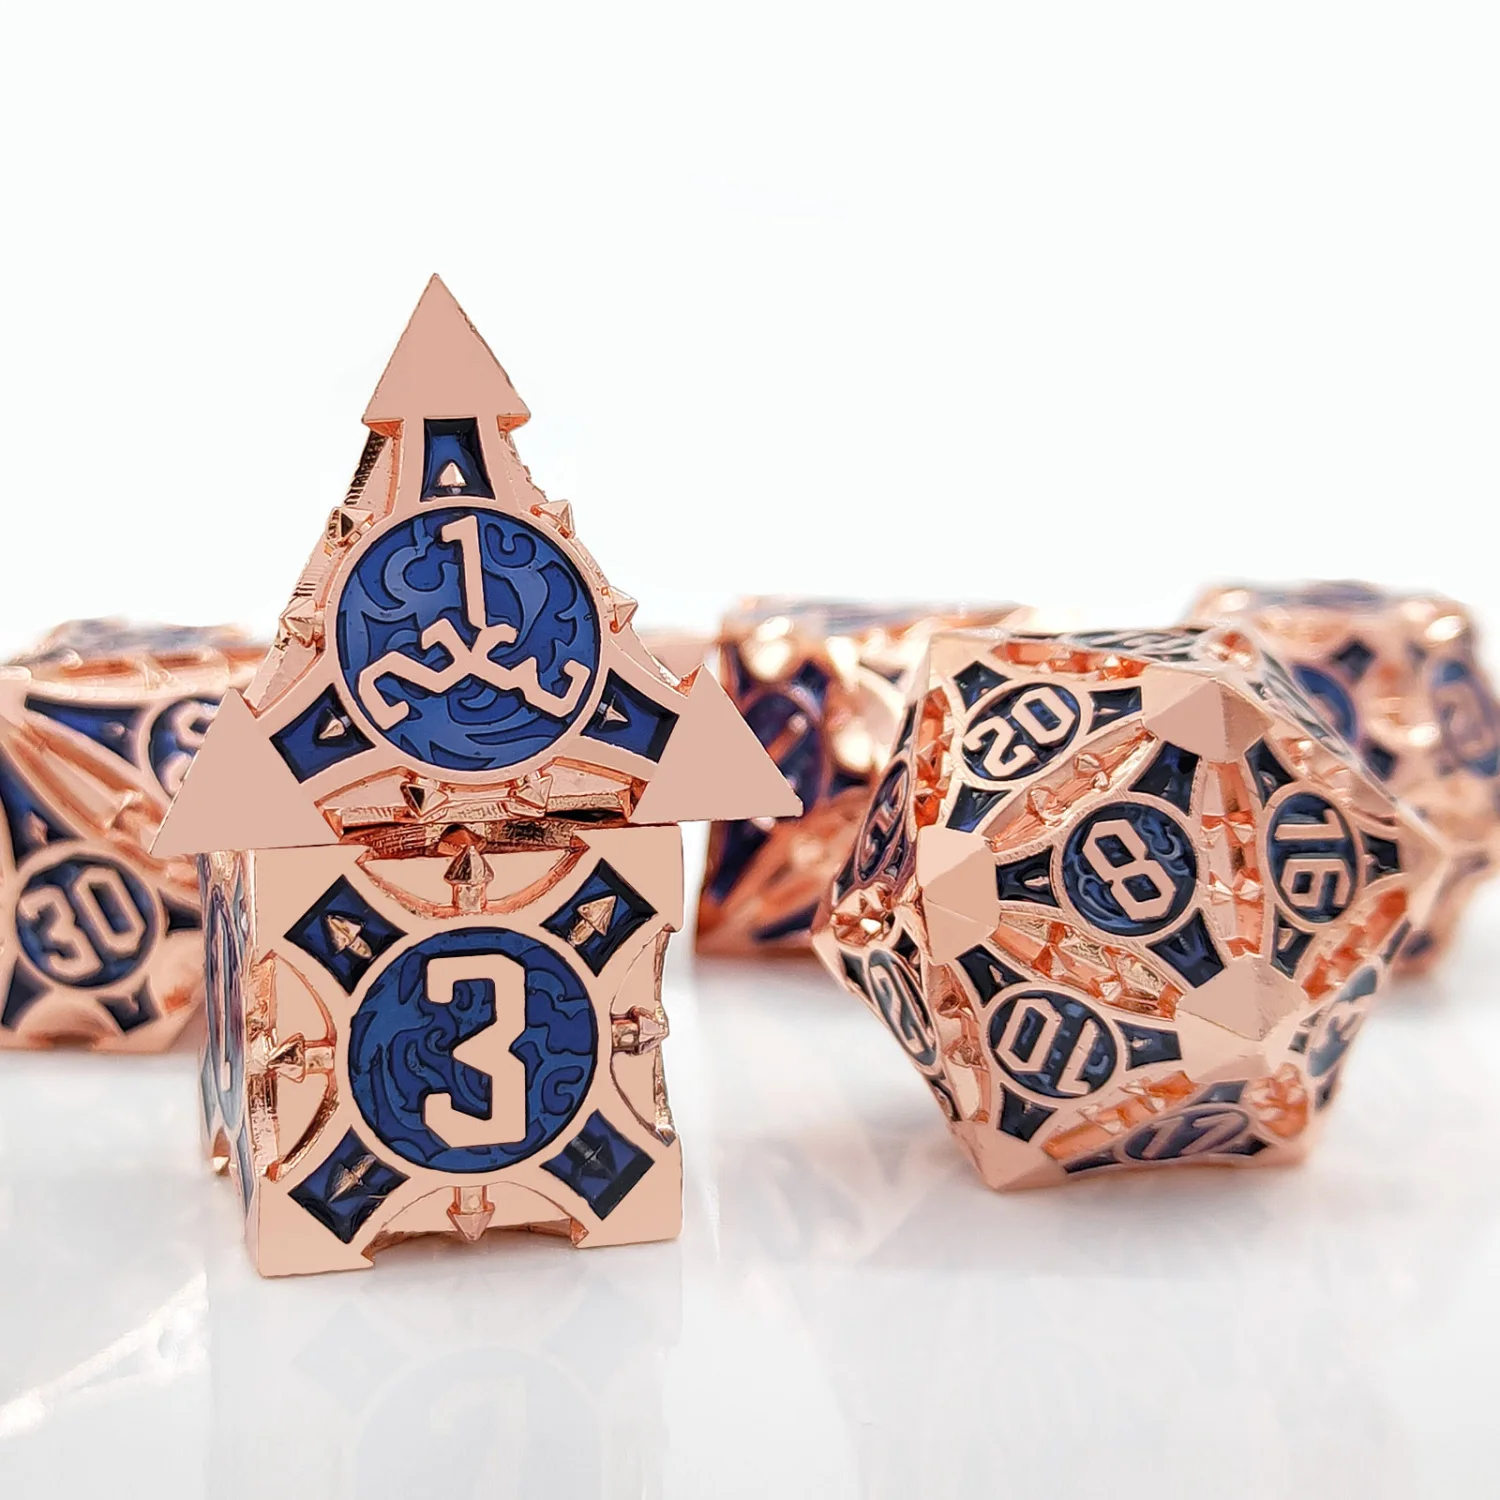 

7pcs Metal Dice for D&D COC DND Dungeons & Dragons Game RPG Hobby Cthulhu Style Dice D20 Playing Cards Board Game Collection Toy